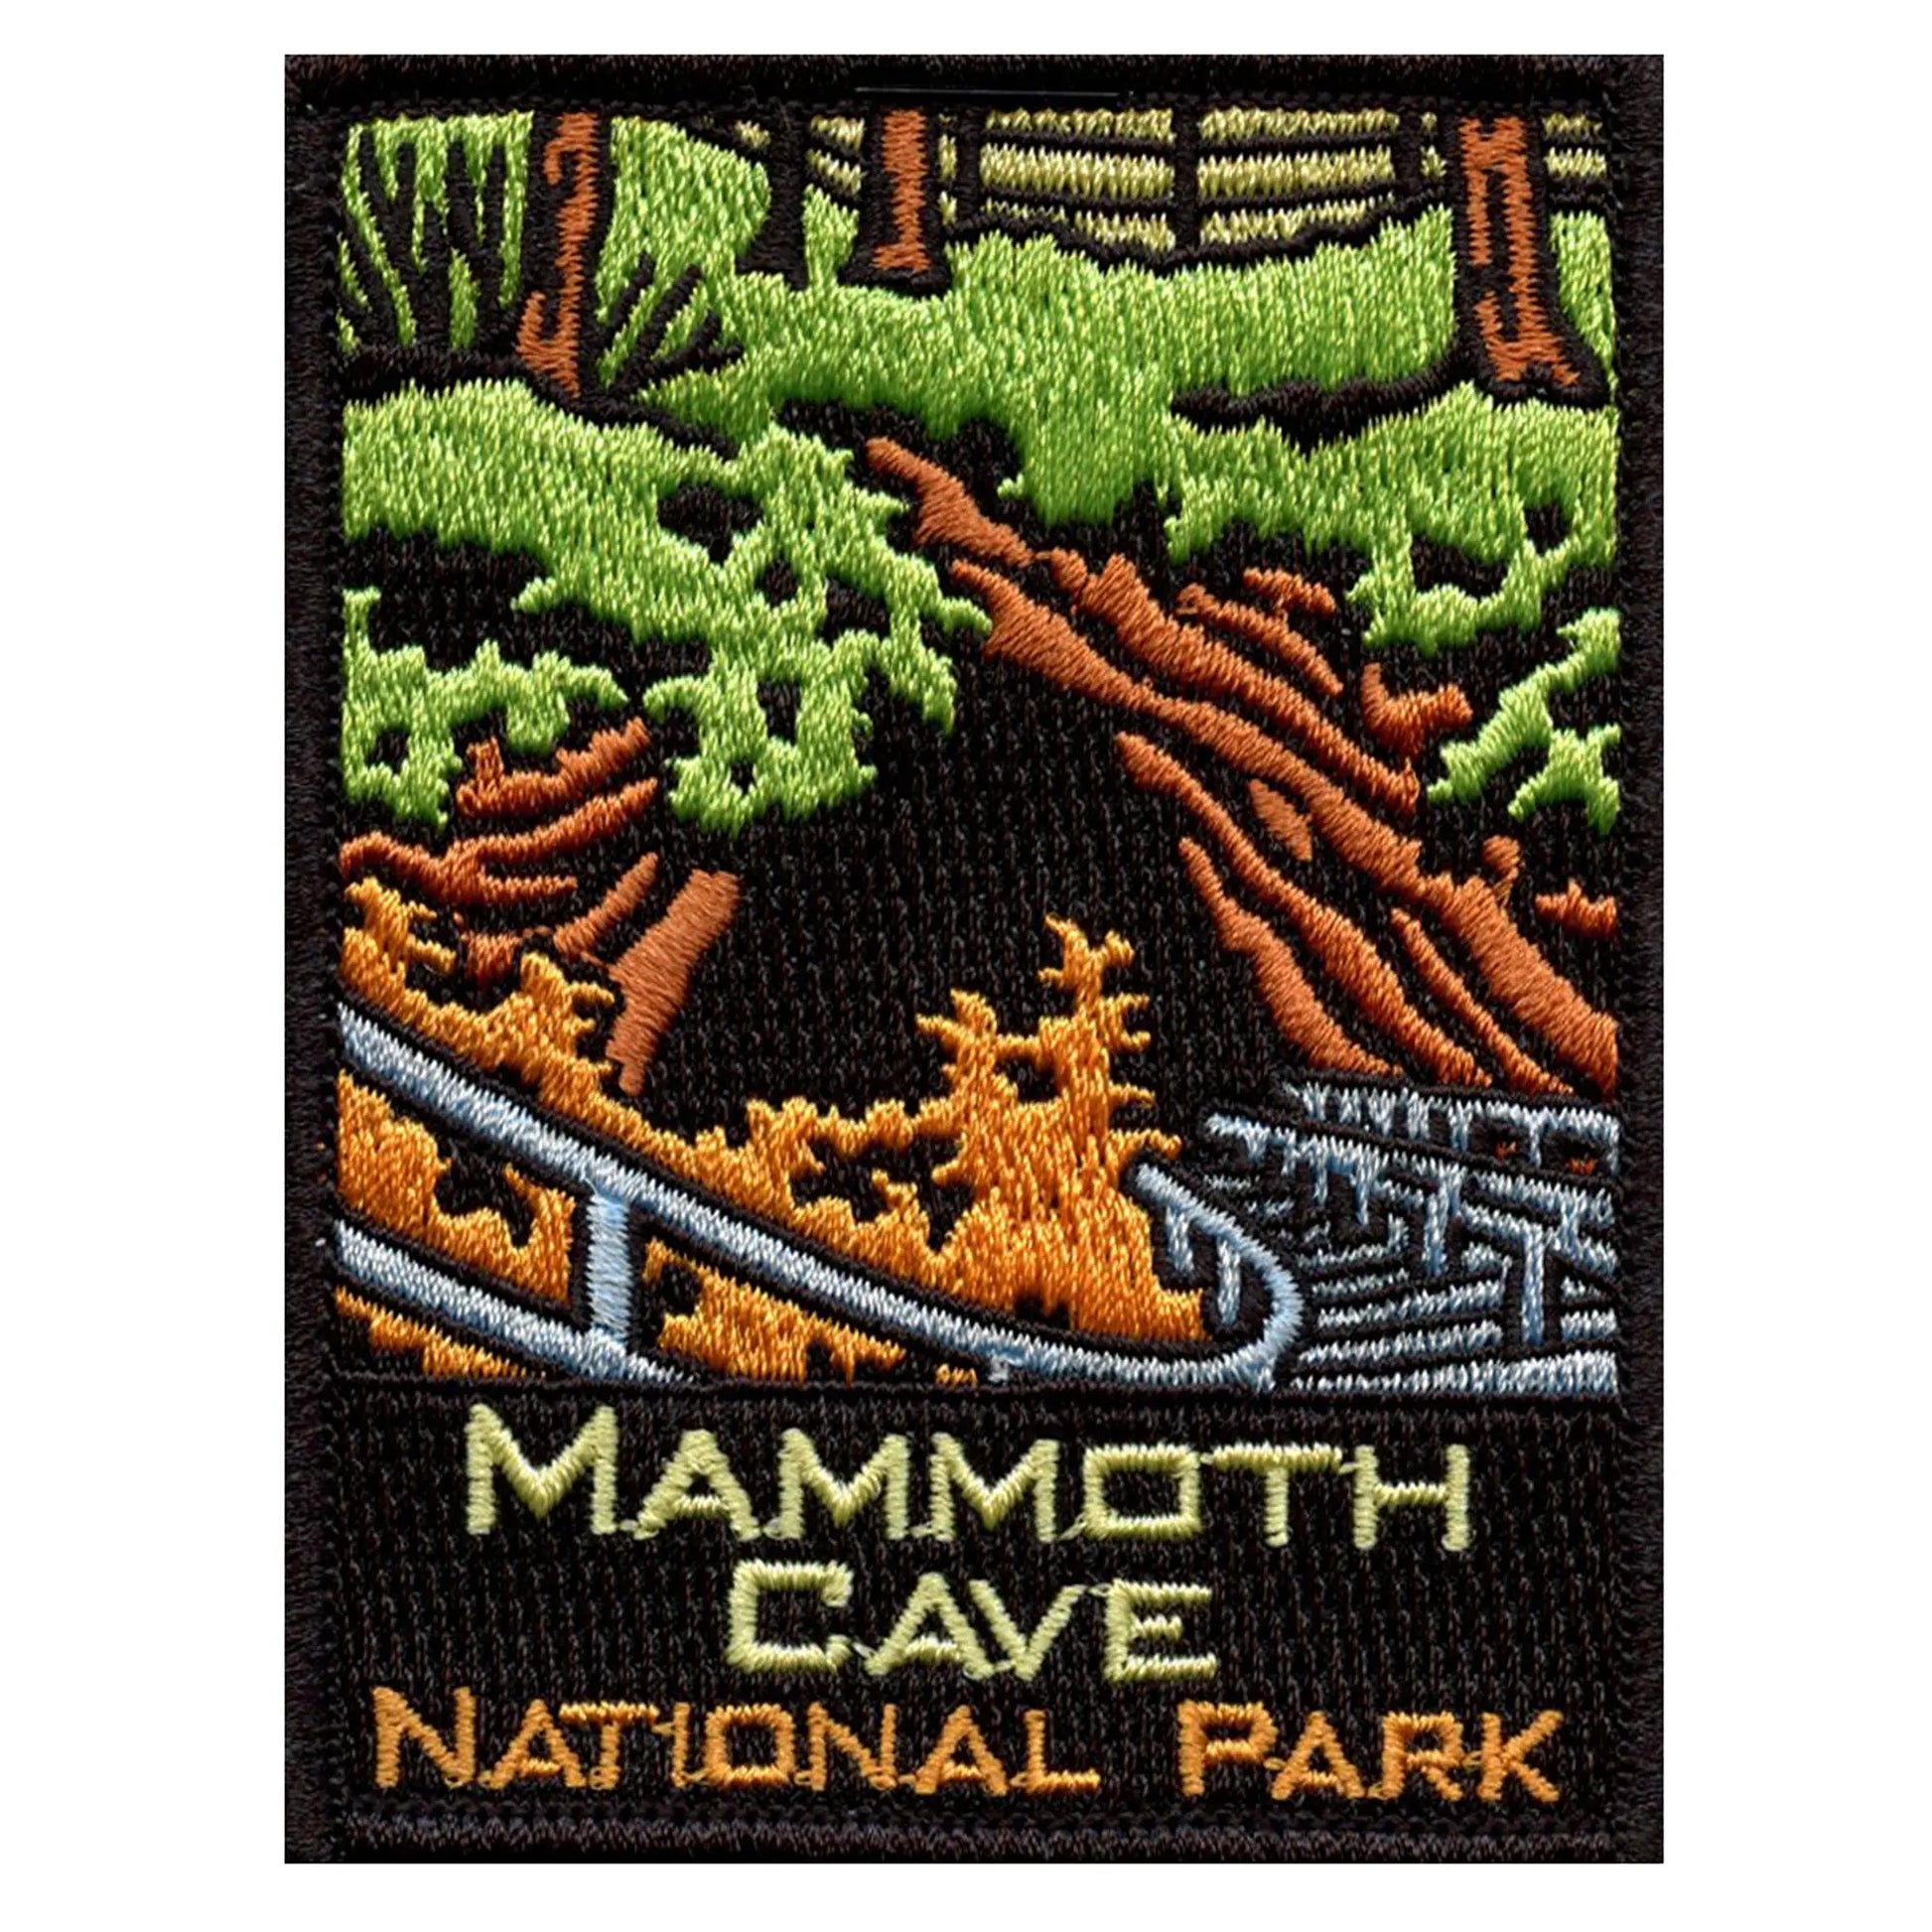 Mammoth Cave National Park Patch West Central Kentucky Travel Embroidered Iron On